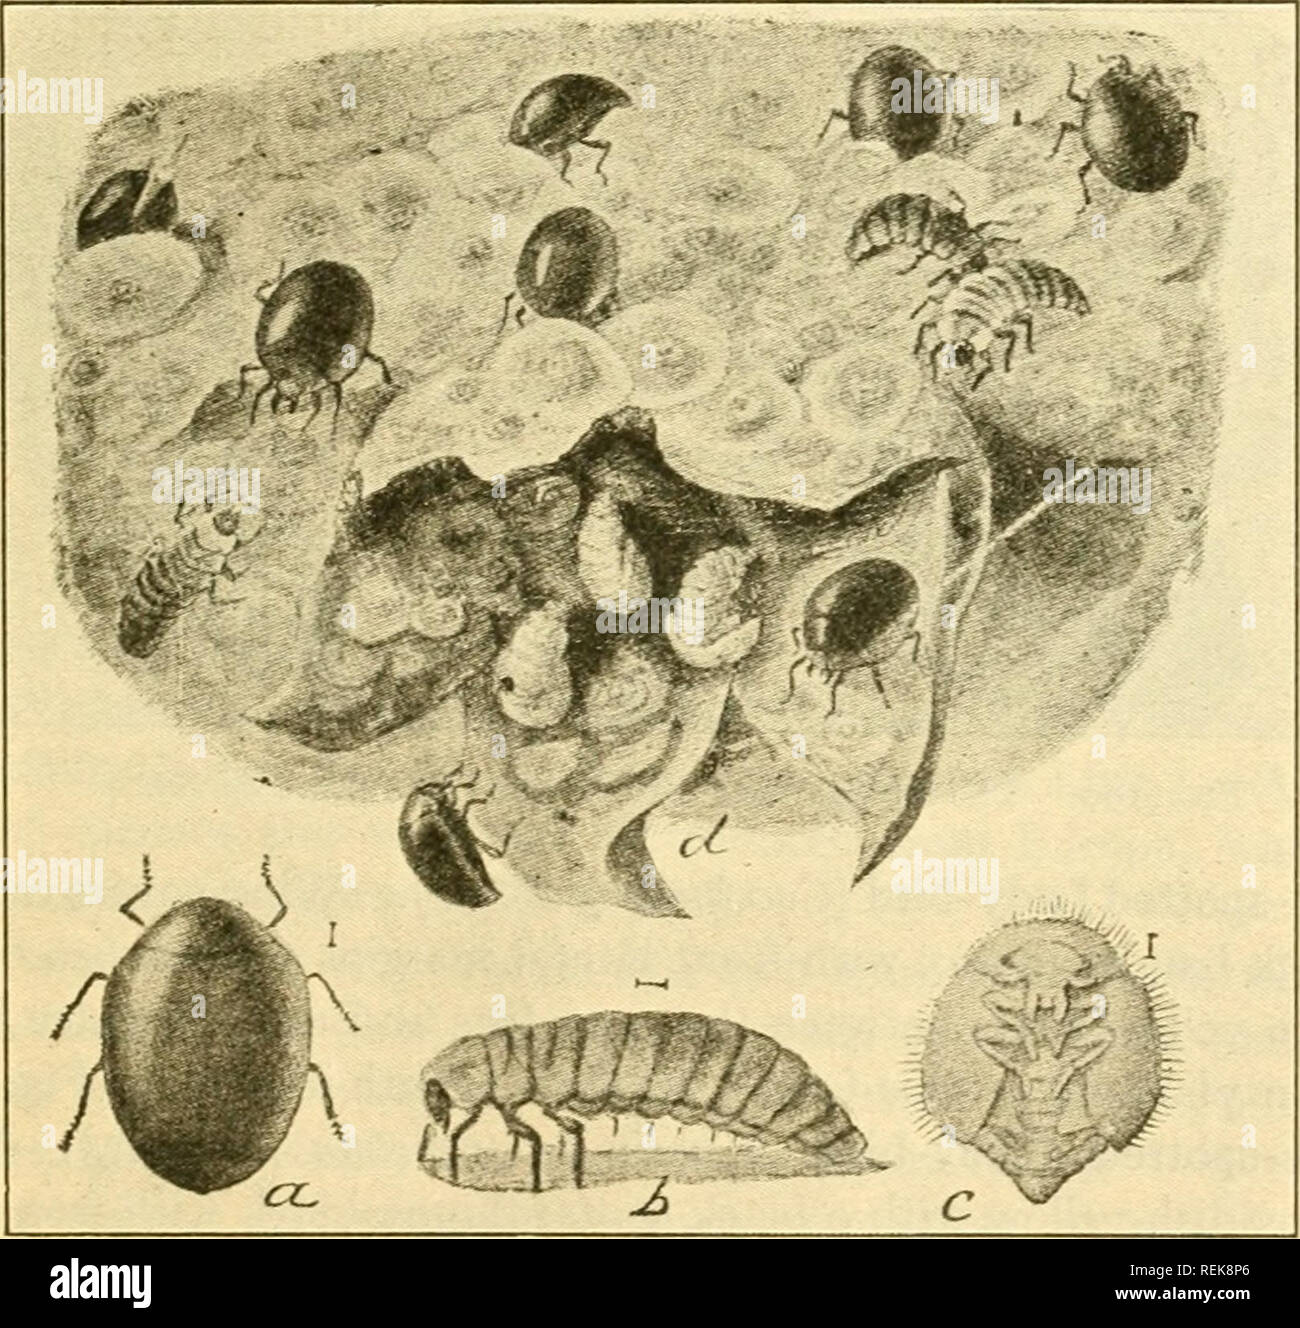 . Class book of economic entomology, with special reference to the economic insects of the northern United States and Canada. Beneficial insects; Insect pests; Insects; Insects. Fig. 188.—Lady-bird beetles: a. a 2-spotted lady-beetle (Adalia bipunctata); b, the convergent lady-beetle {Hippodamia convergens); c, the g-spotted lady- beetle (Coccinella g-notata); d, twice-stabbed lady-bird (Chilocorus bivulnertis); e, the 5-spotted lady-beetle (C s-notata). (After Briilon.). Fig. 189.—Penlilia misella LeC: a, beetle; h, larva; c, pupa; d, blossom end of scale infested pear, showing beetles and th Stock Photo